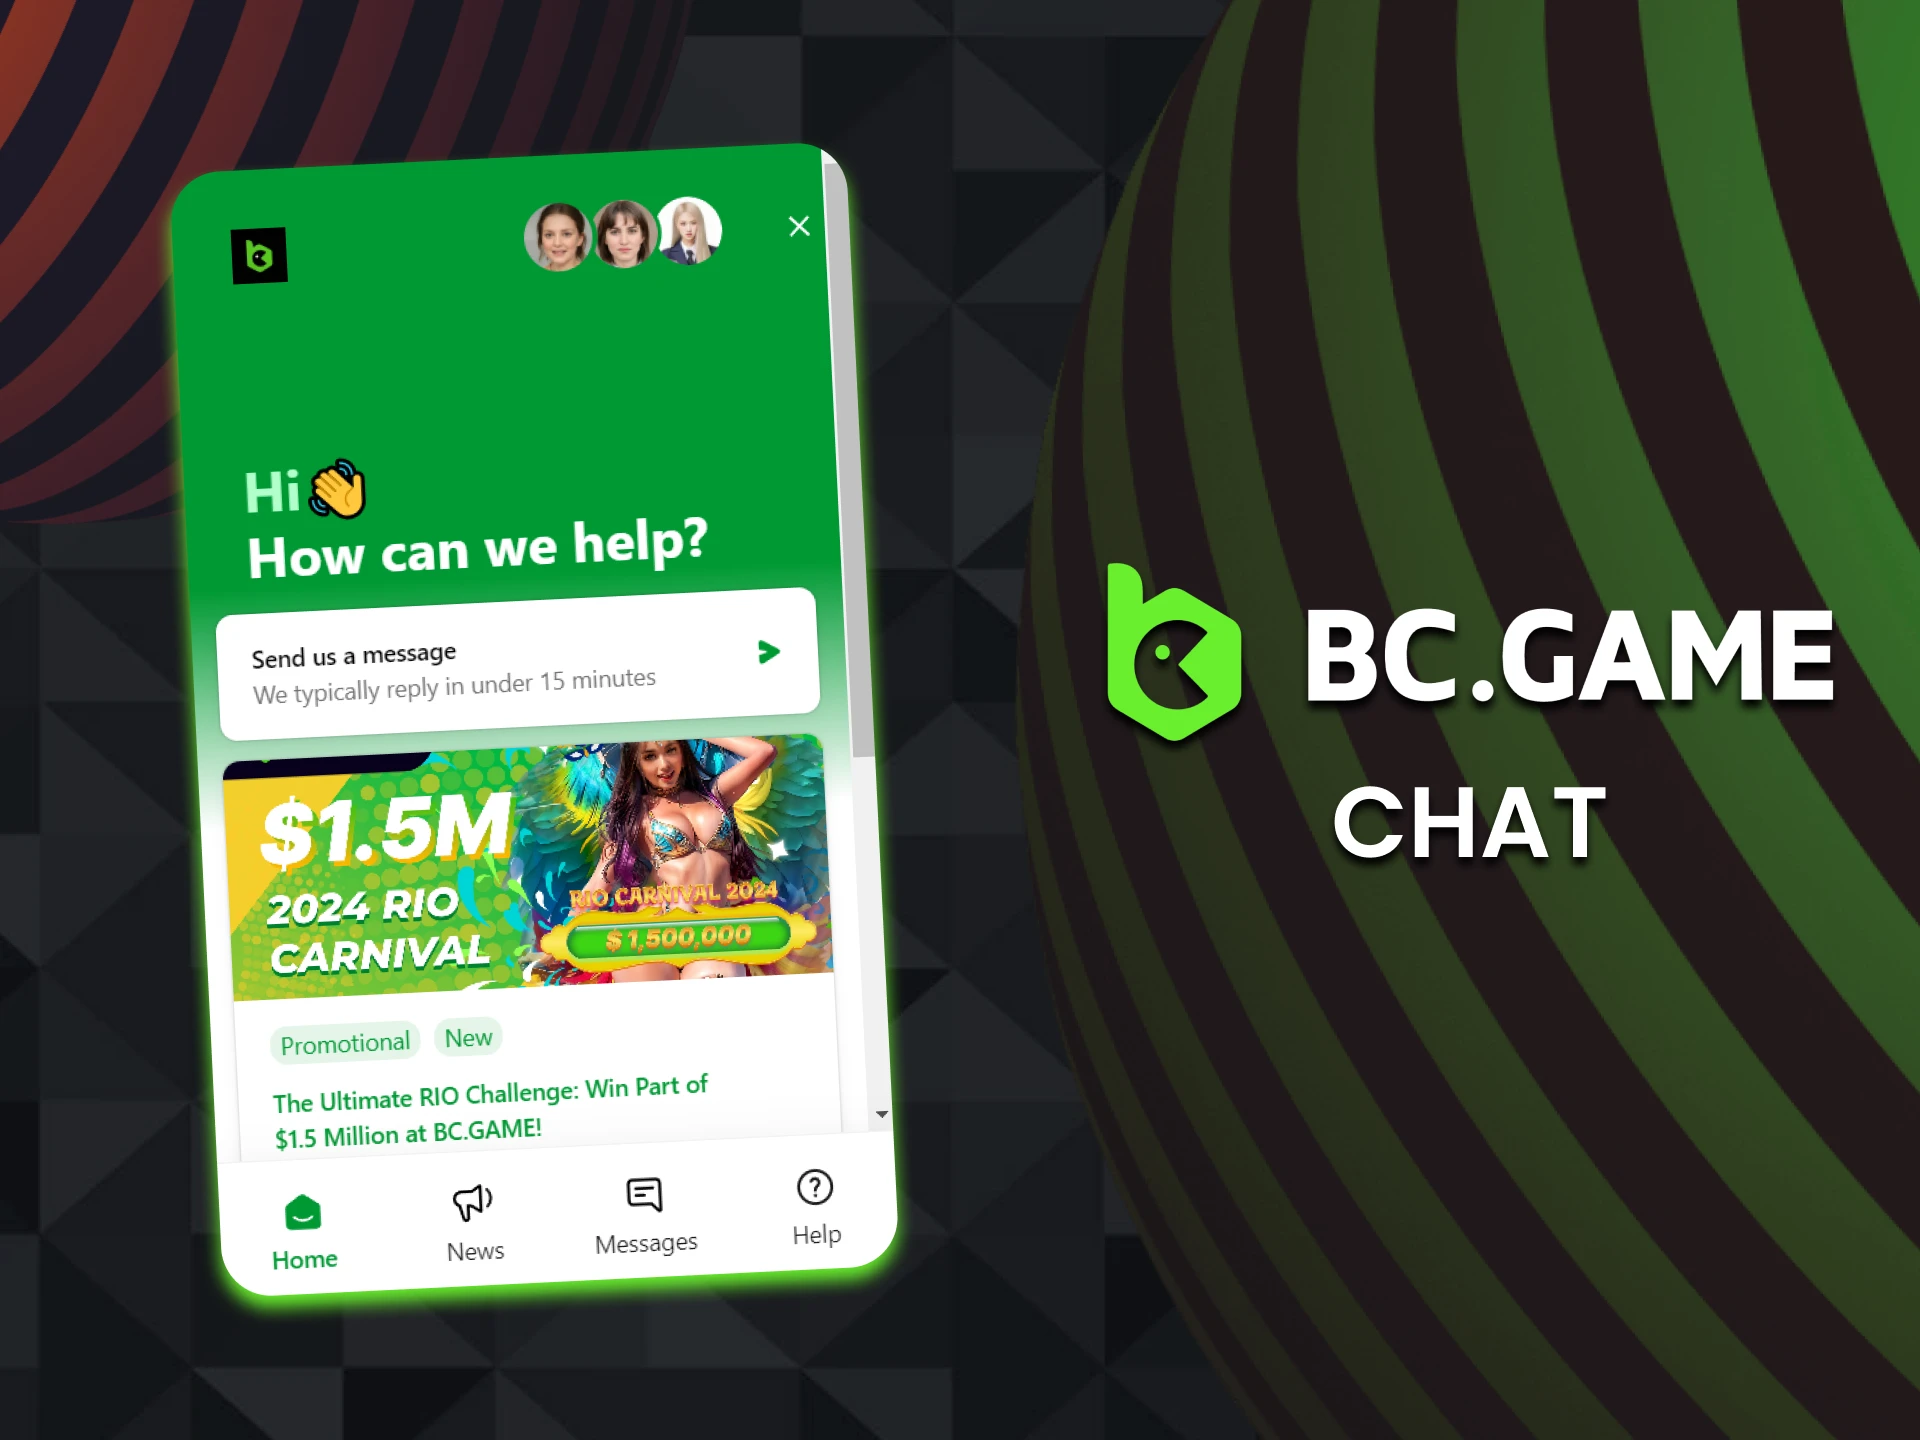 Contact the BC Game support team via live chat on the website.